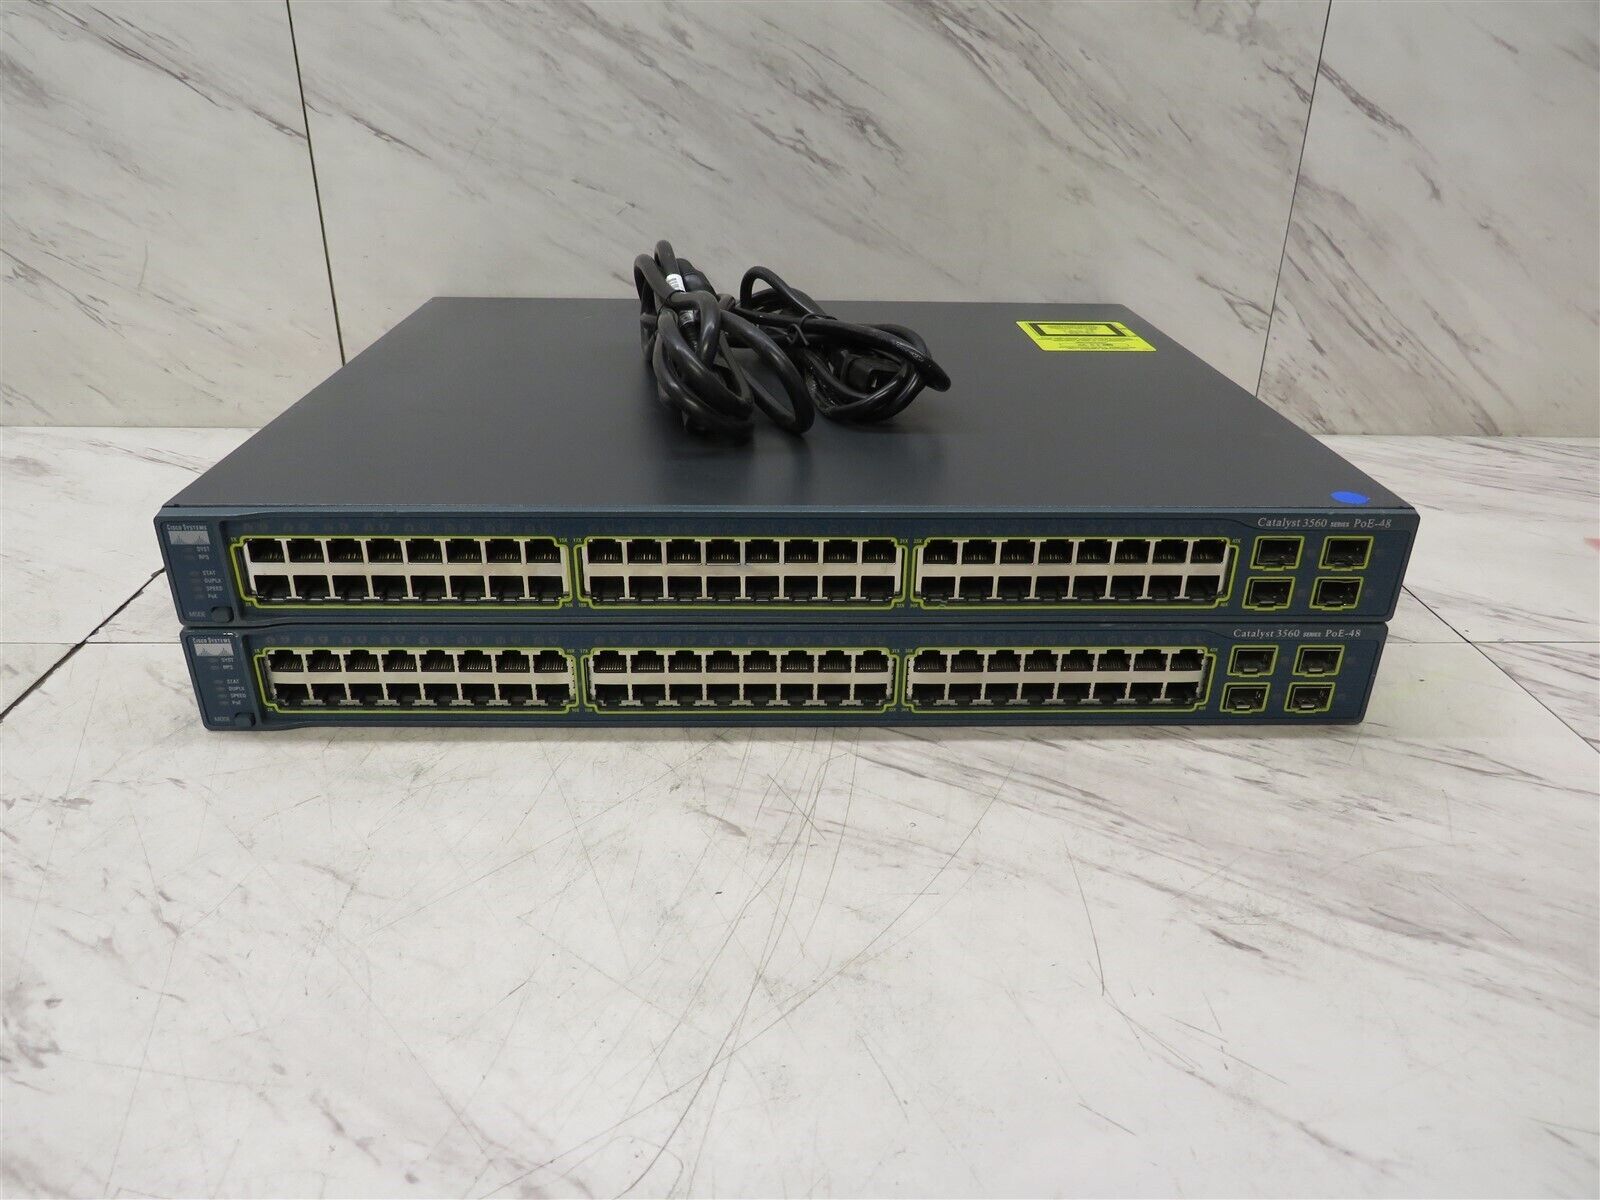 Lot of 2 Cisco Catalyst 3560 PoE 48-Port Ethernet Switch WS-C3560-48PS-S 